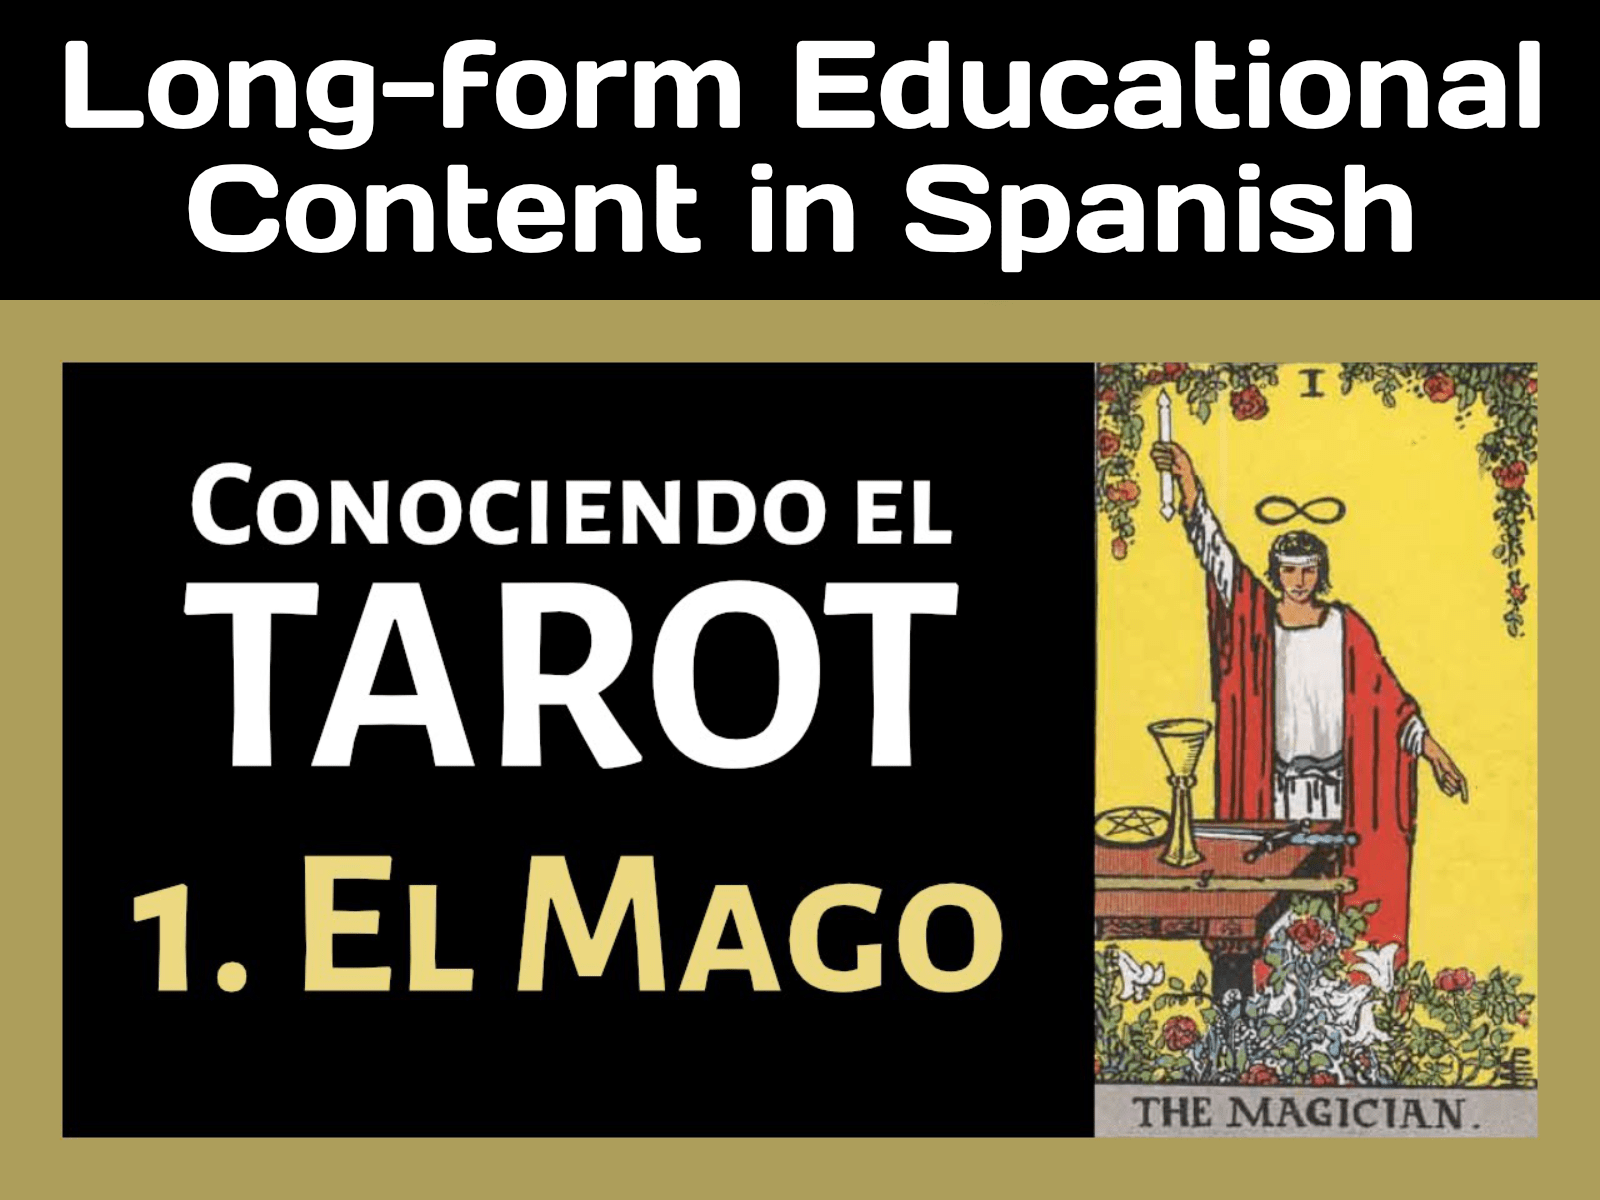 Long-form Educational Content in Spanish by Mario Rodríguez